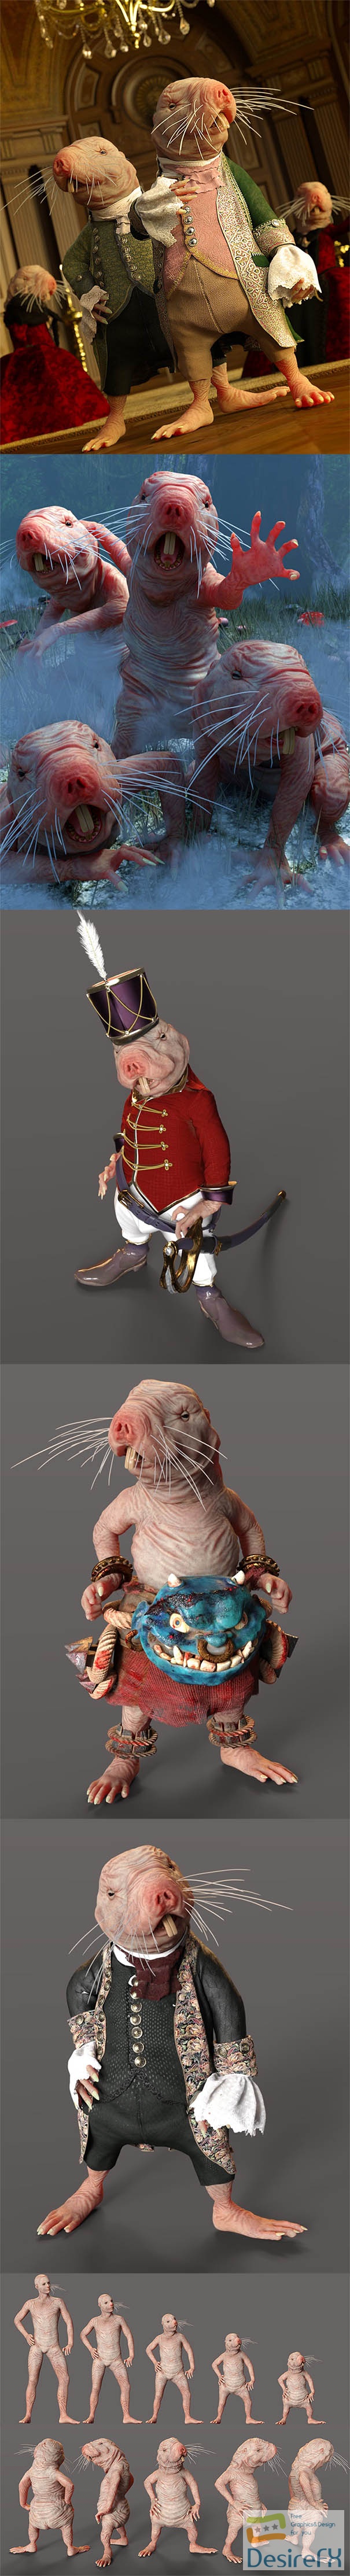 Storybook Naked Mole-rat for Genesis 8.1 Male